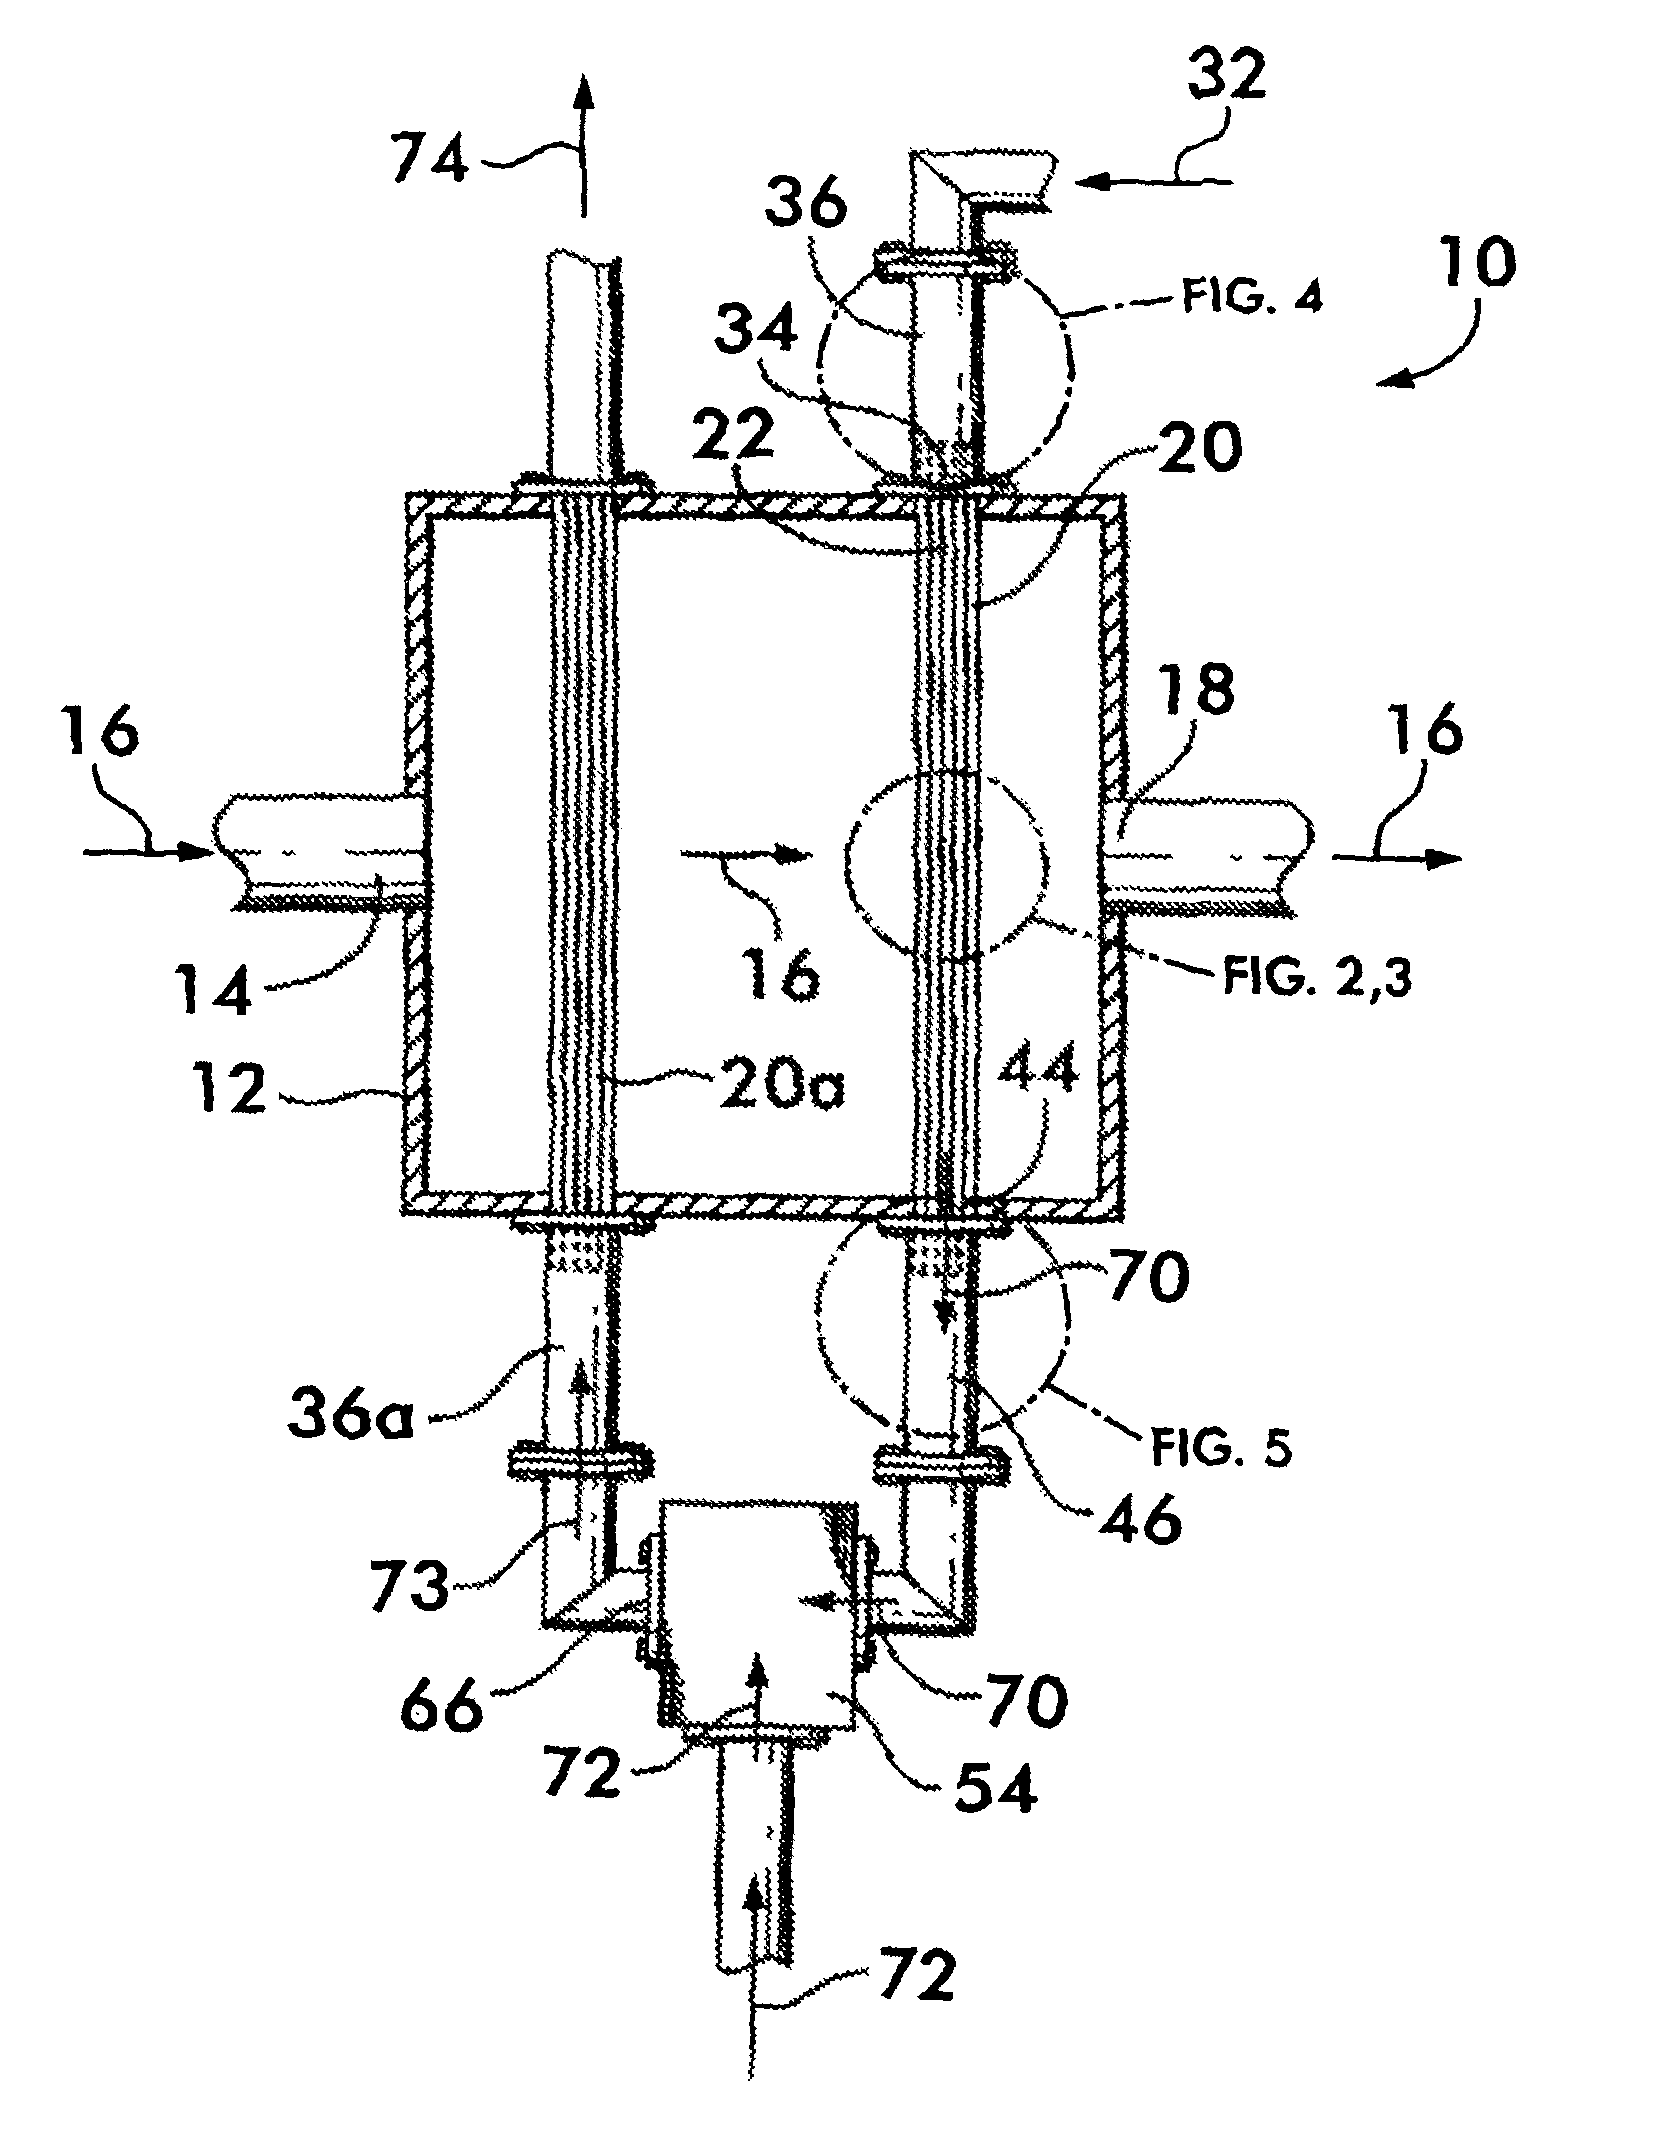 Staged hydrocarbon/steam reformer apparatus and method